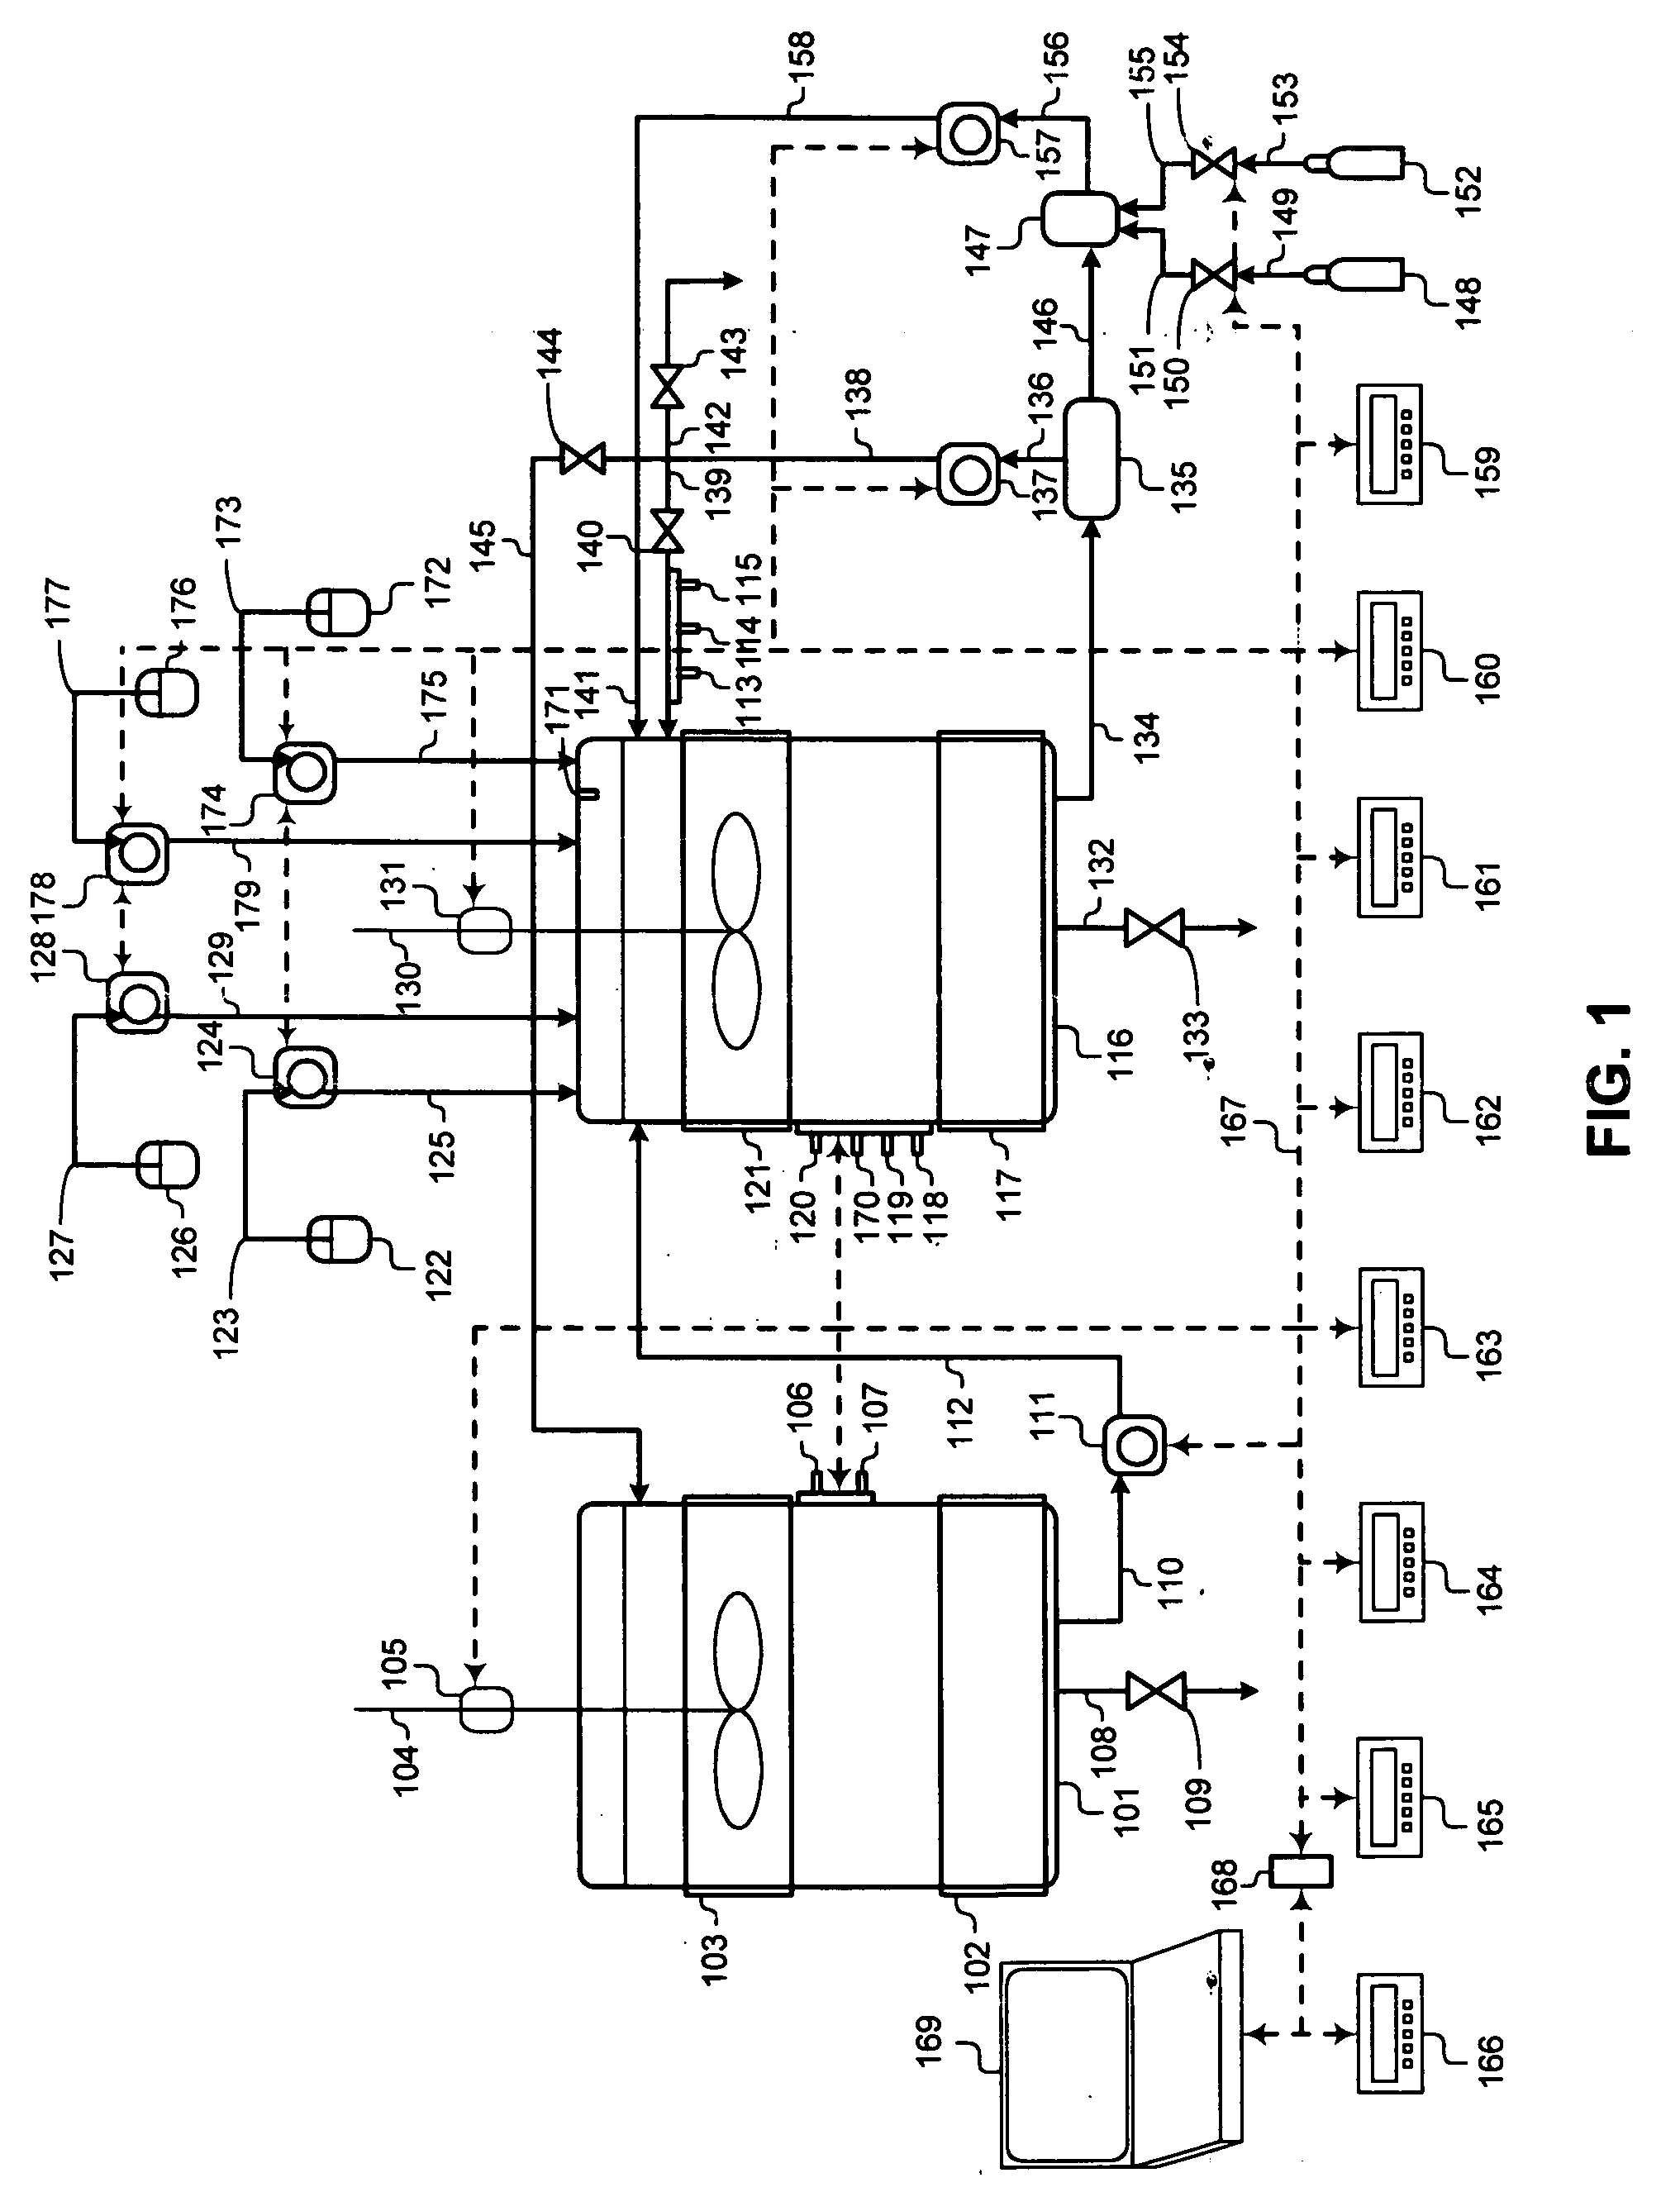 Method and apparatus for cell culture using a two liquid phase bioreactor